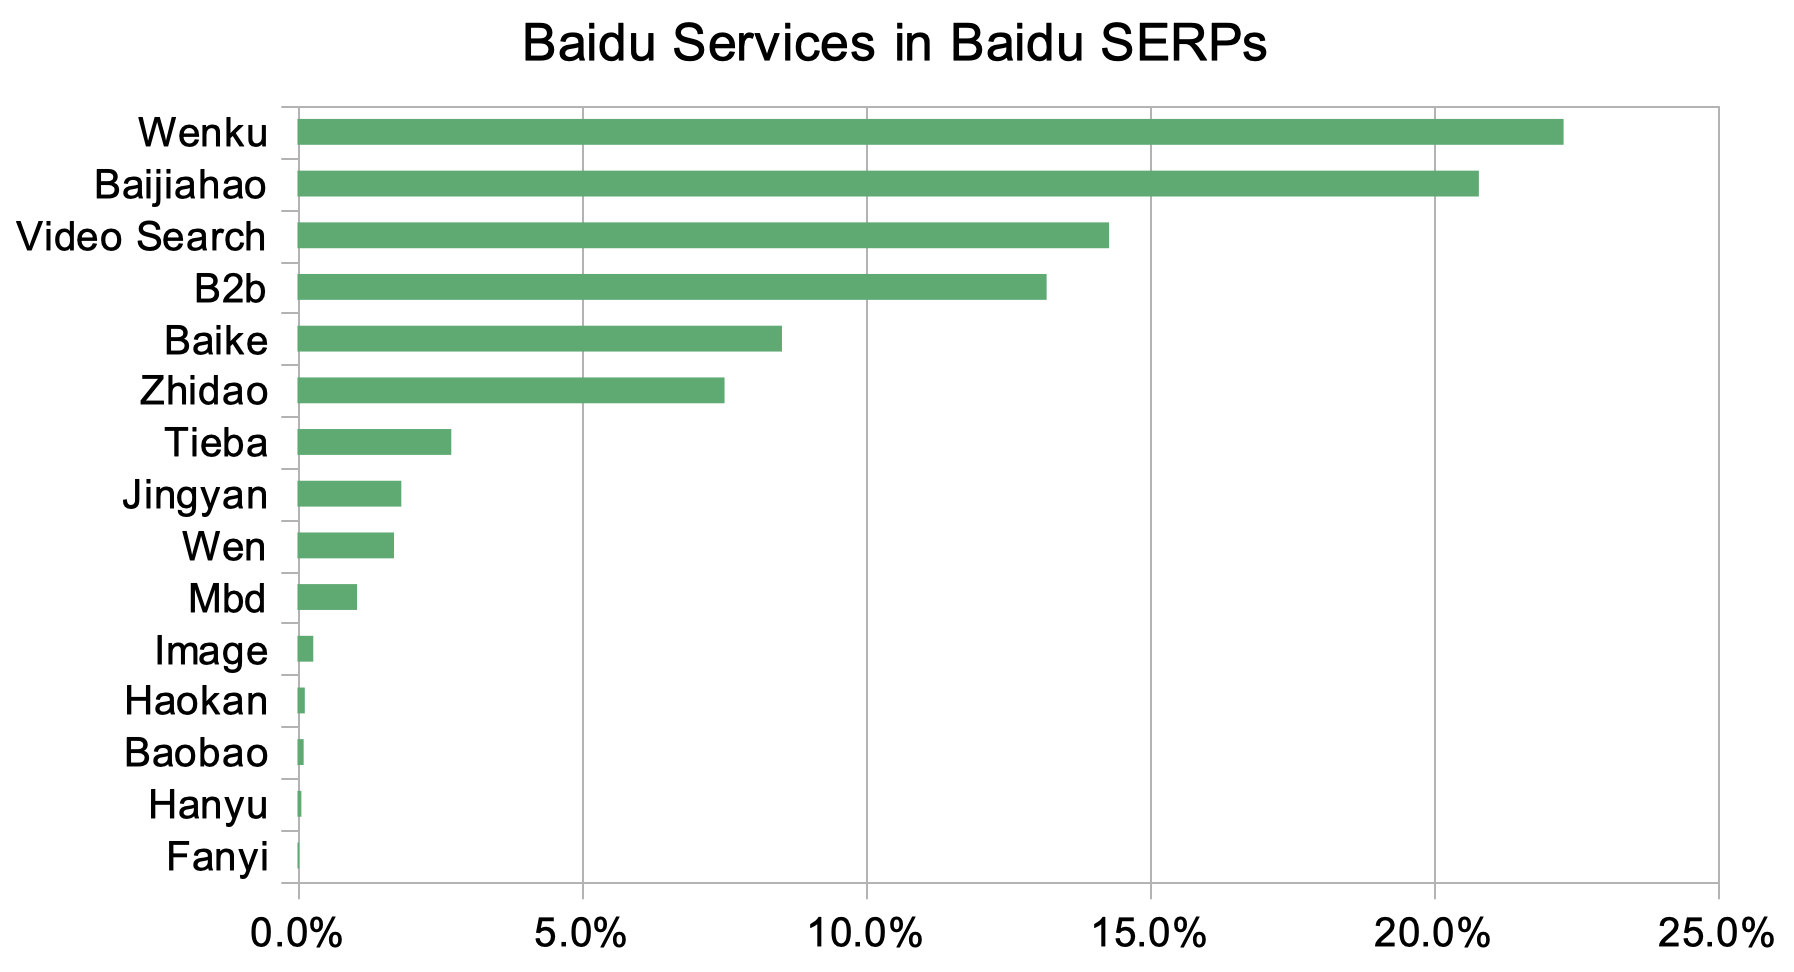 these are the most important Baidu services ranked on Baidu's SERPs